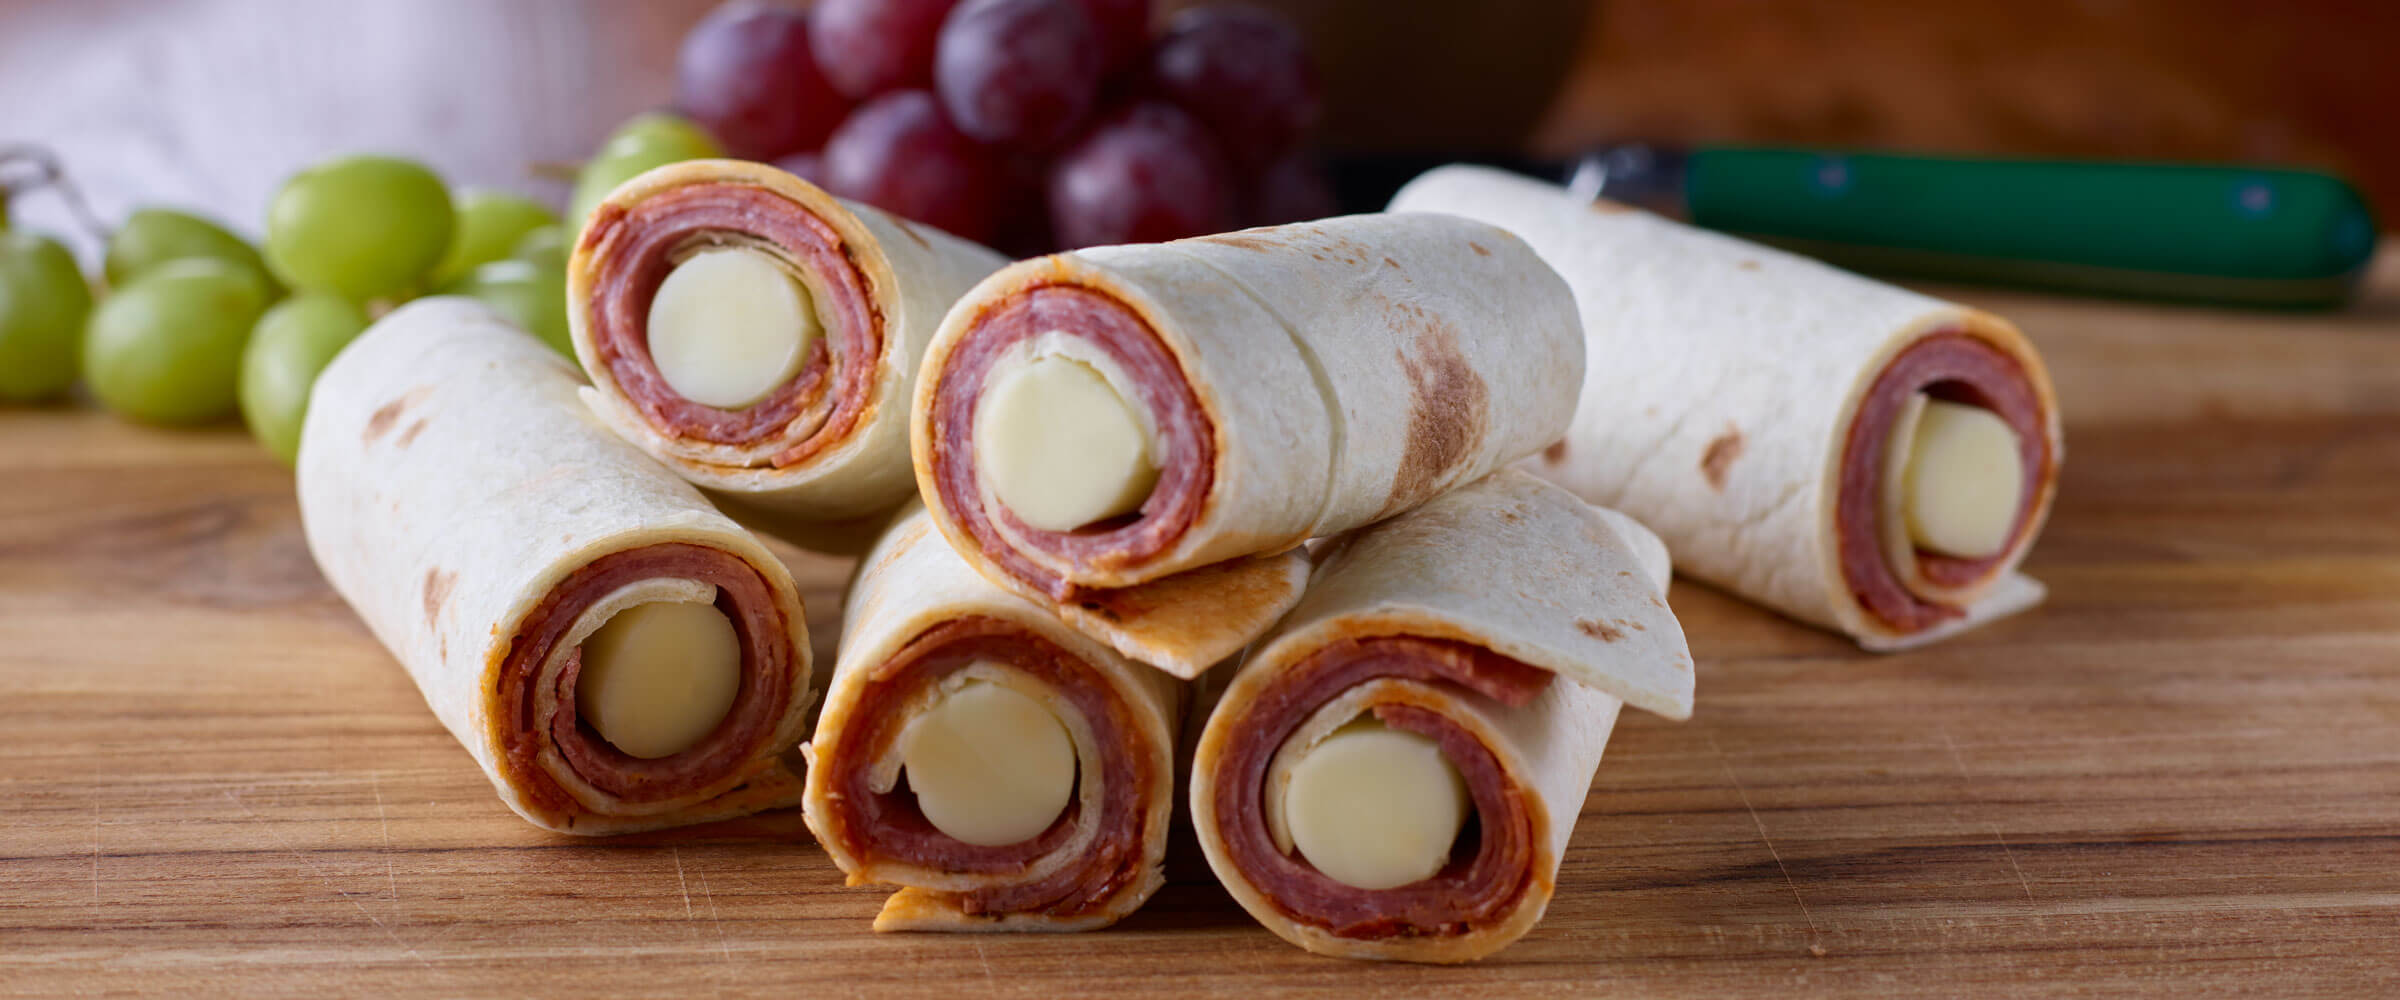 Salami Wrapped cheese with tortilla on wood baord